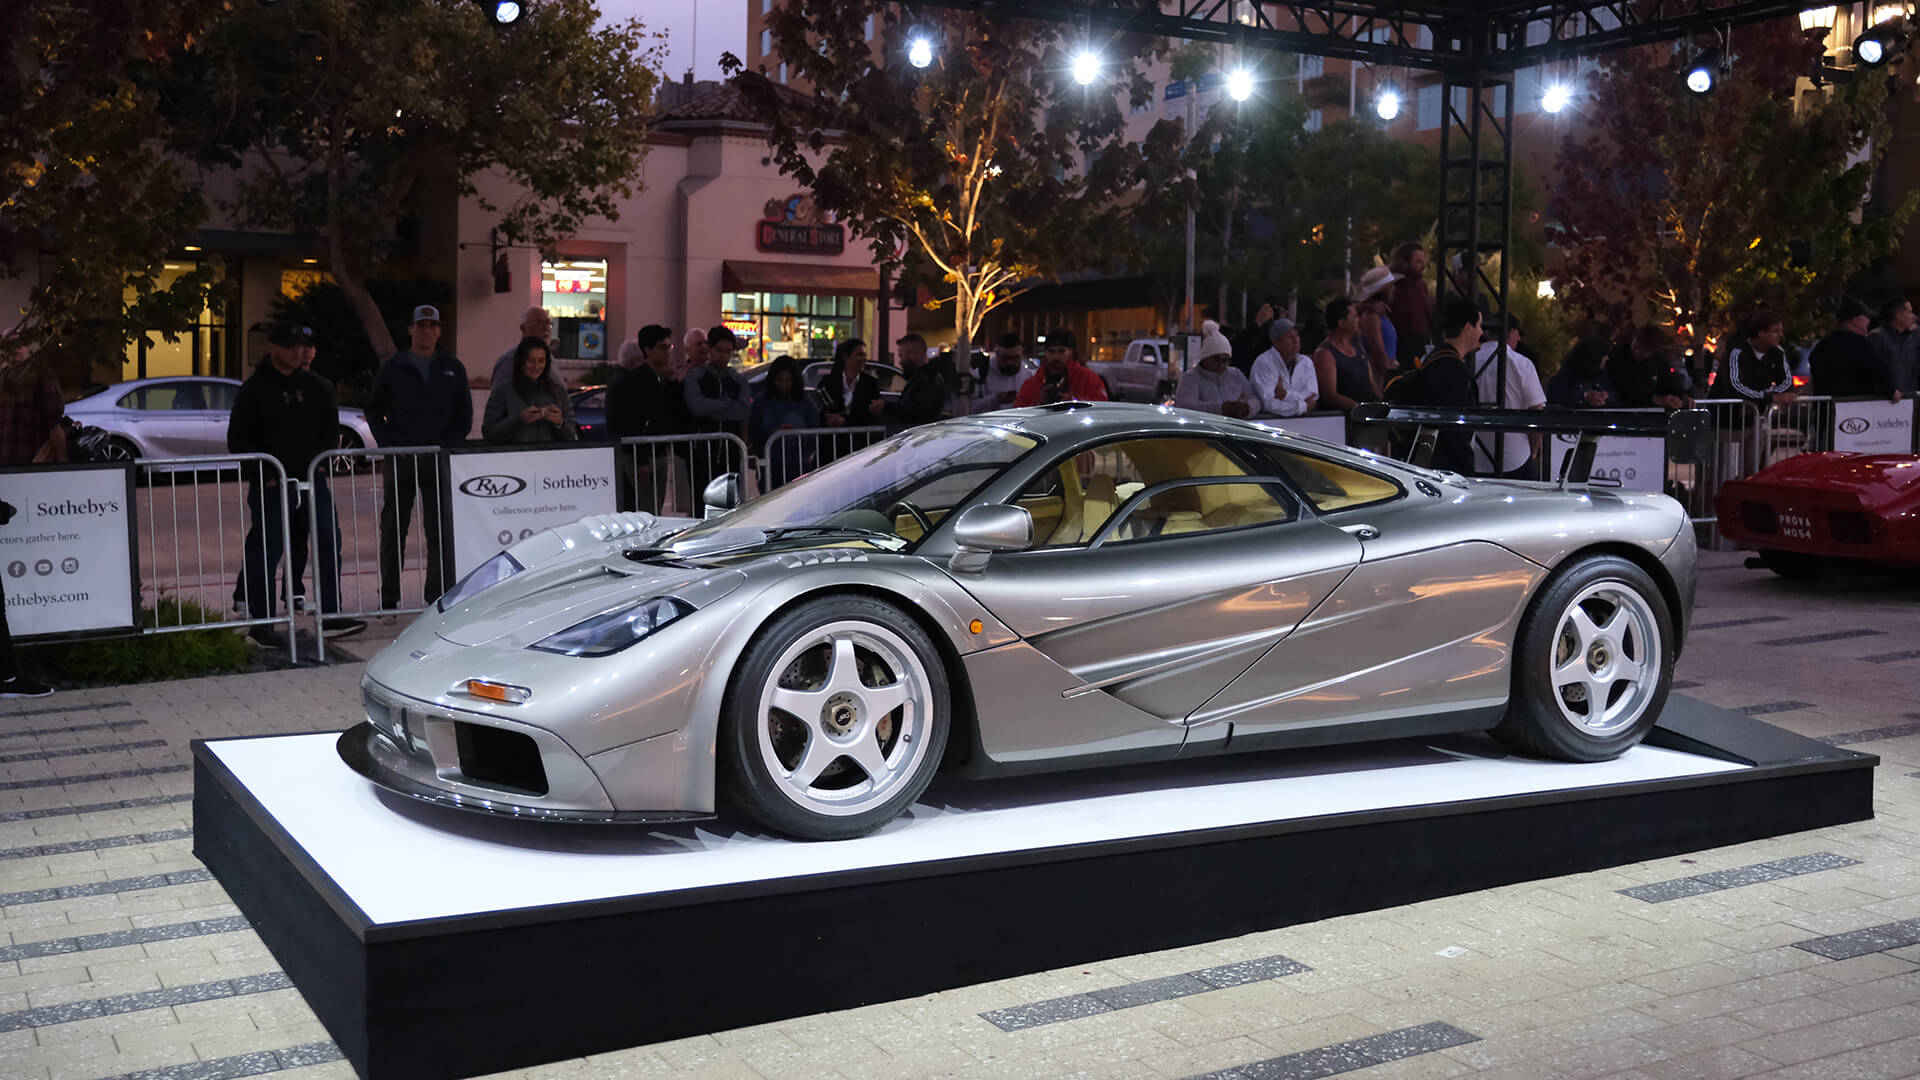 $19.8m McLaren F1 leads the way for RM at the Portola Plaza